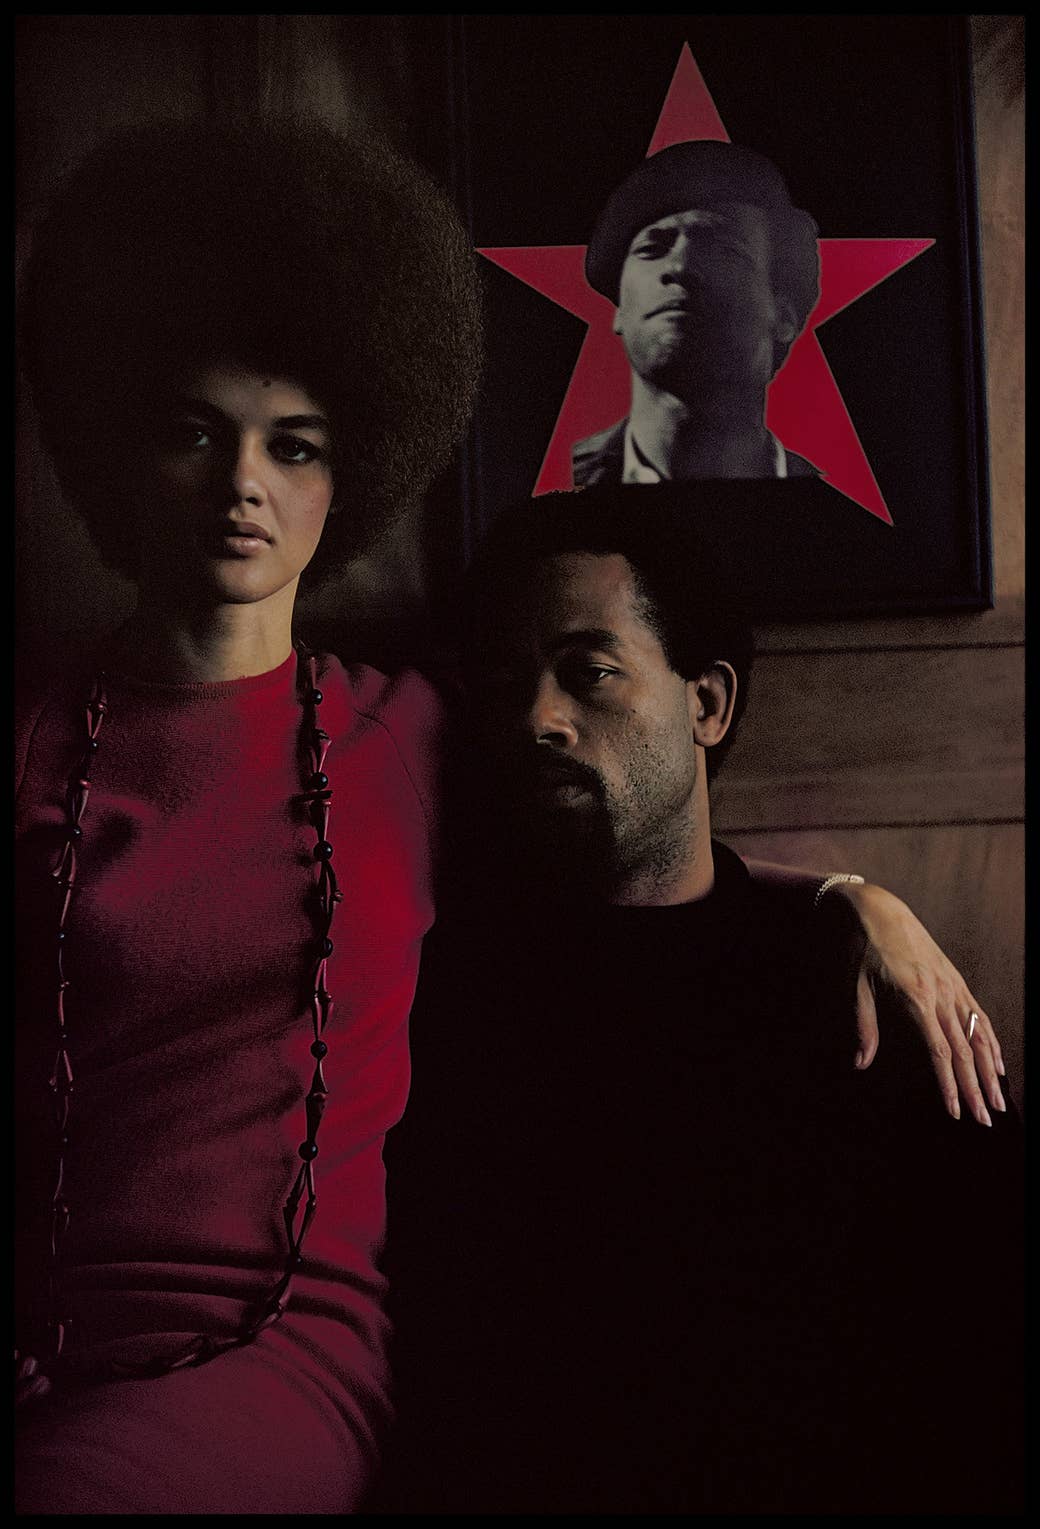 two black panthers, eldridge cleaver and his wife, in front of a poster of another black panther